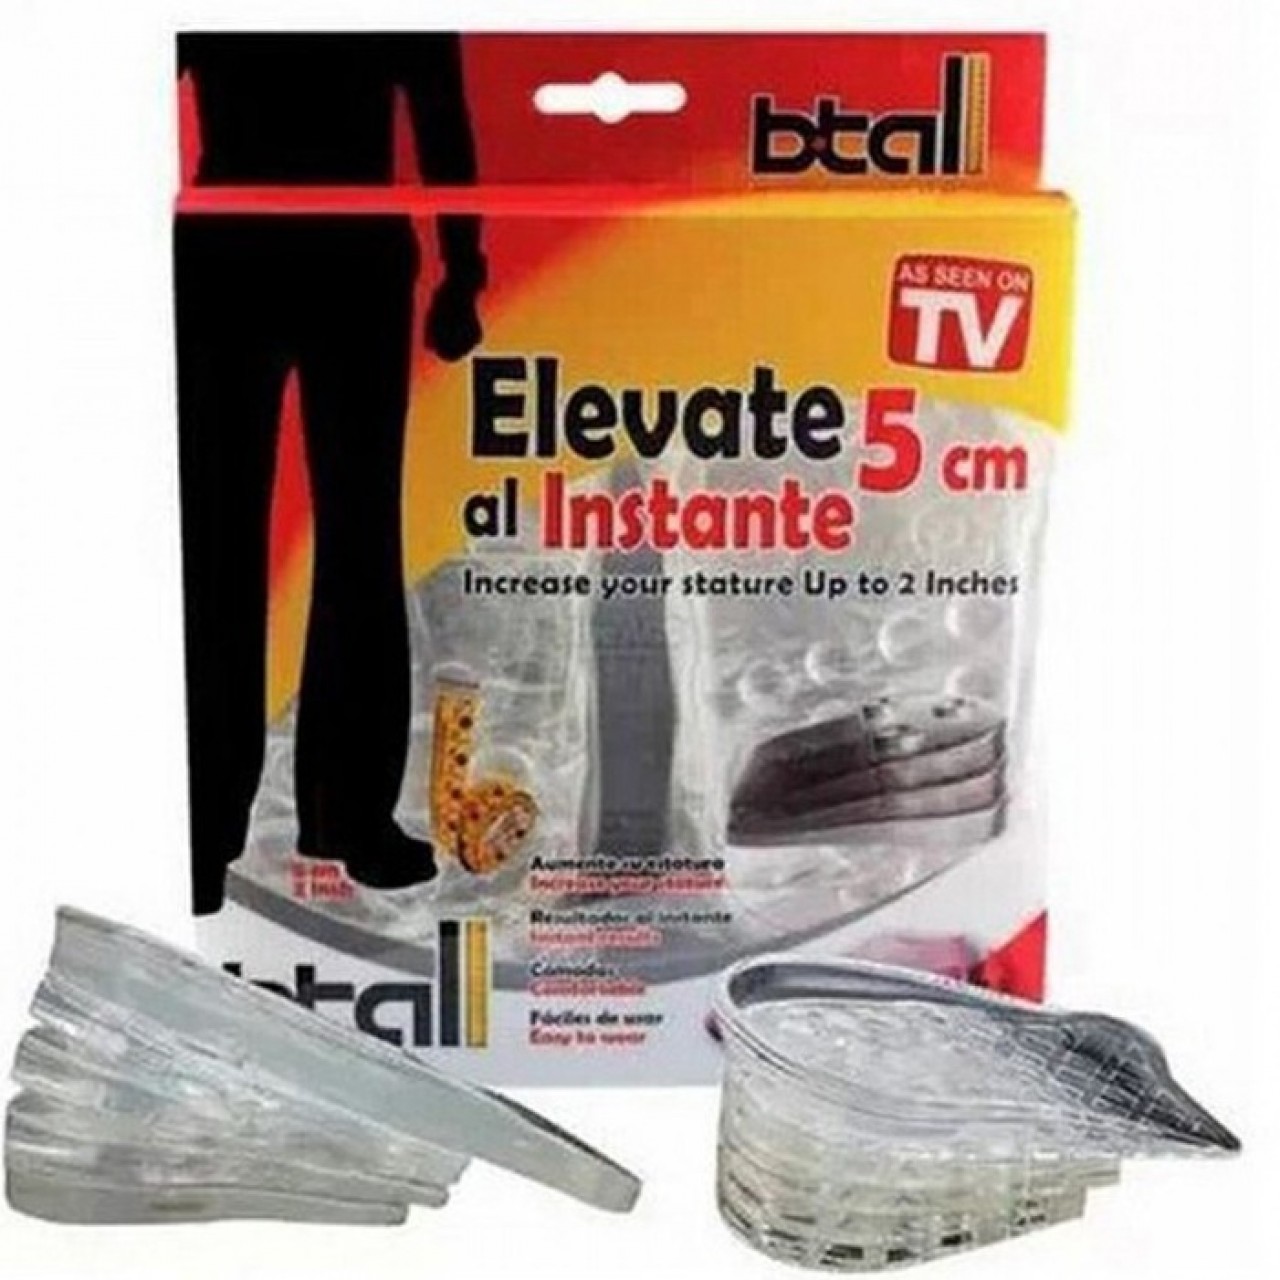 Elevate Height Up to 5 cm Instantly - 2 in 1 B Tall Shoe Insoles